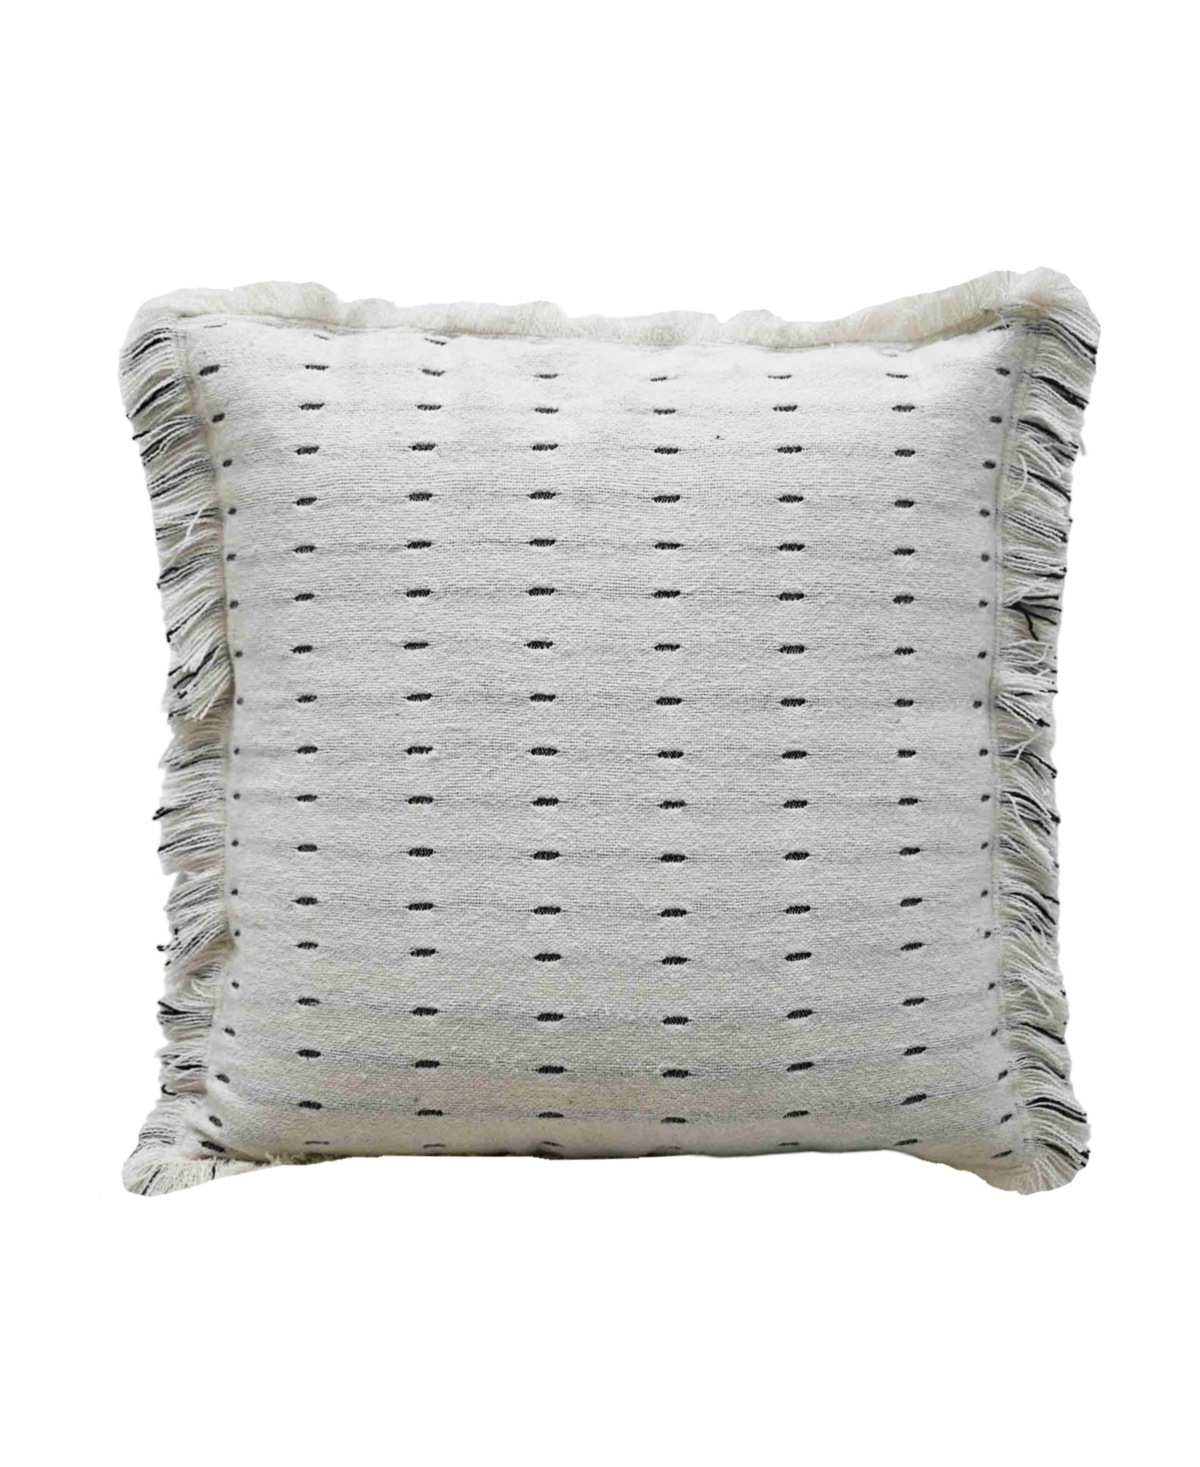 Vibhsa Linden Street Layered Handwoven Super Soft Decorative Pillow, 20" X 20" In Multi Color